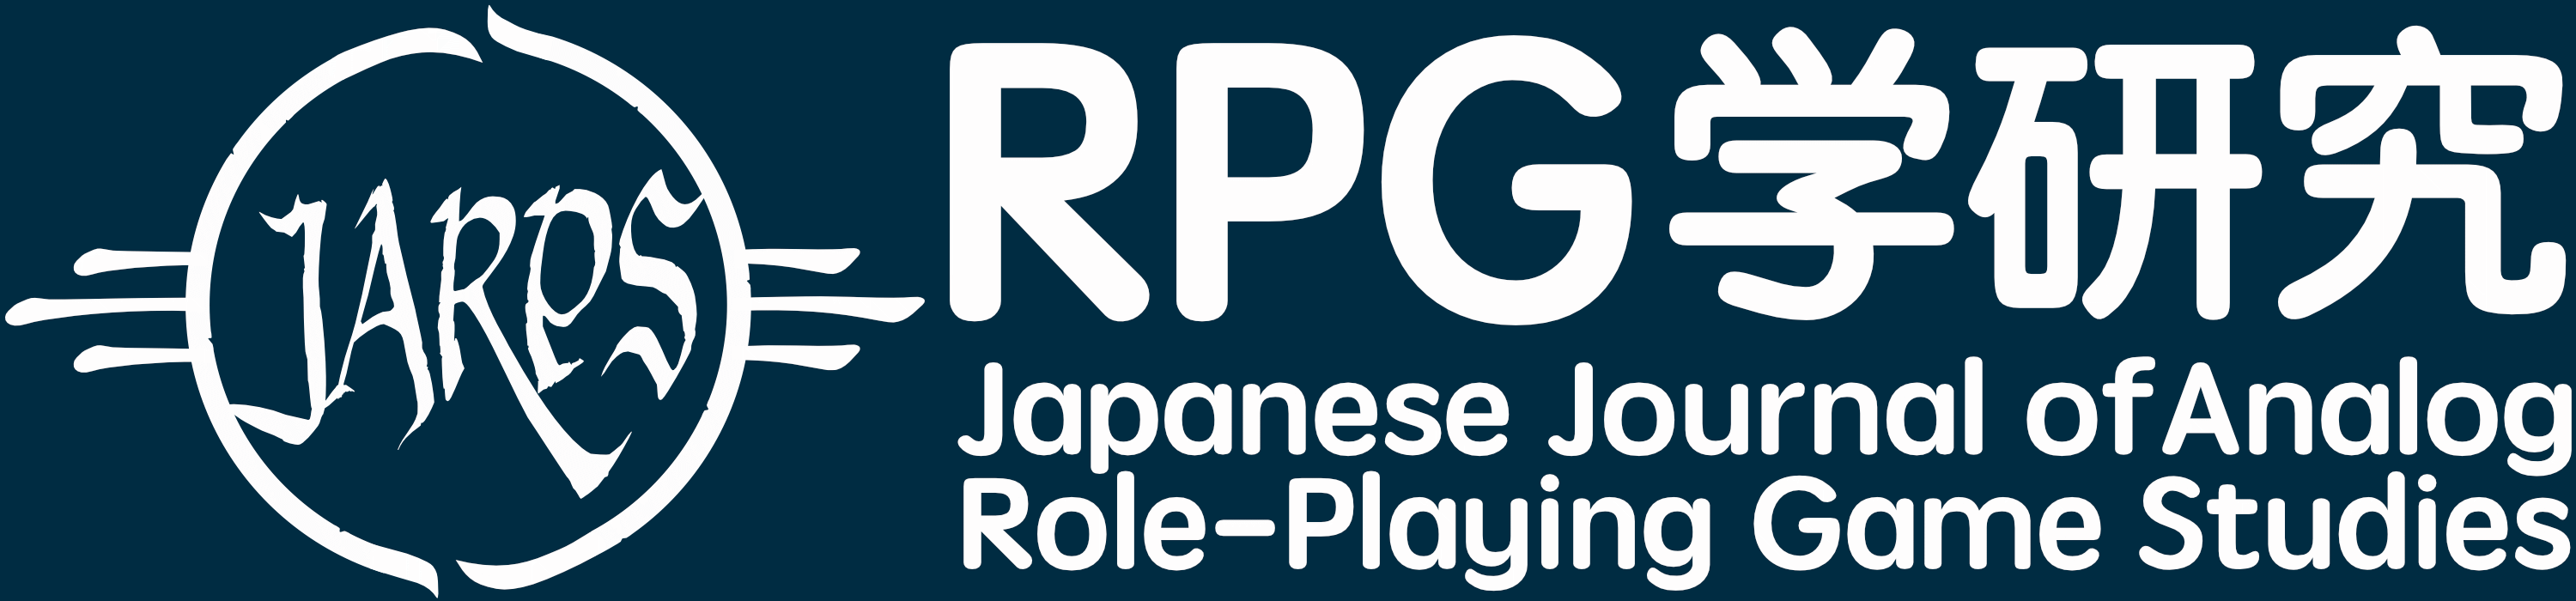 Japanese Journal of Analog Role-Playing Game Studies